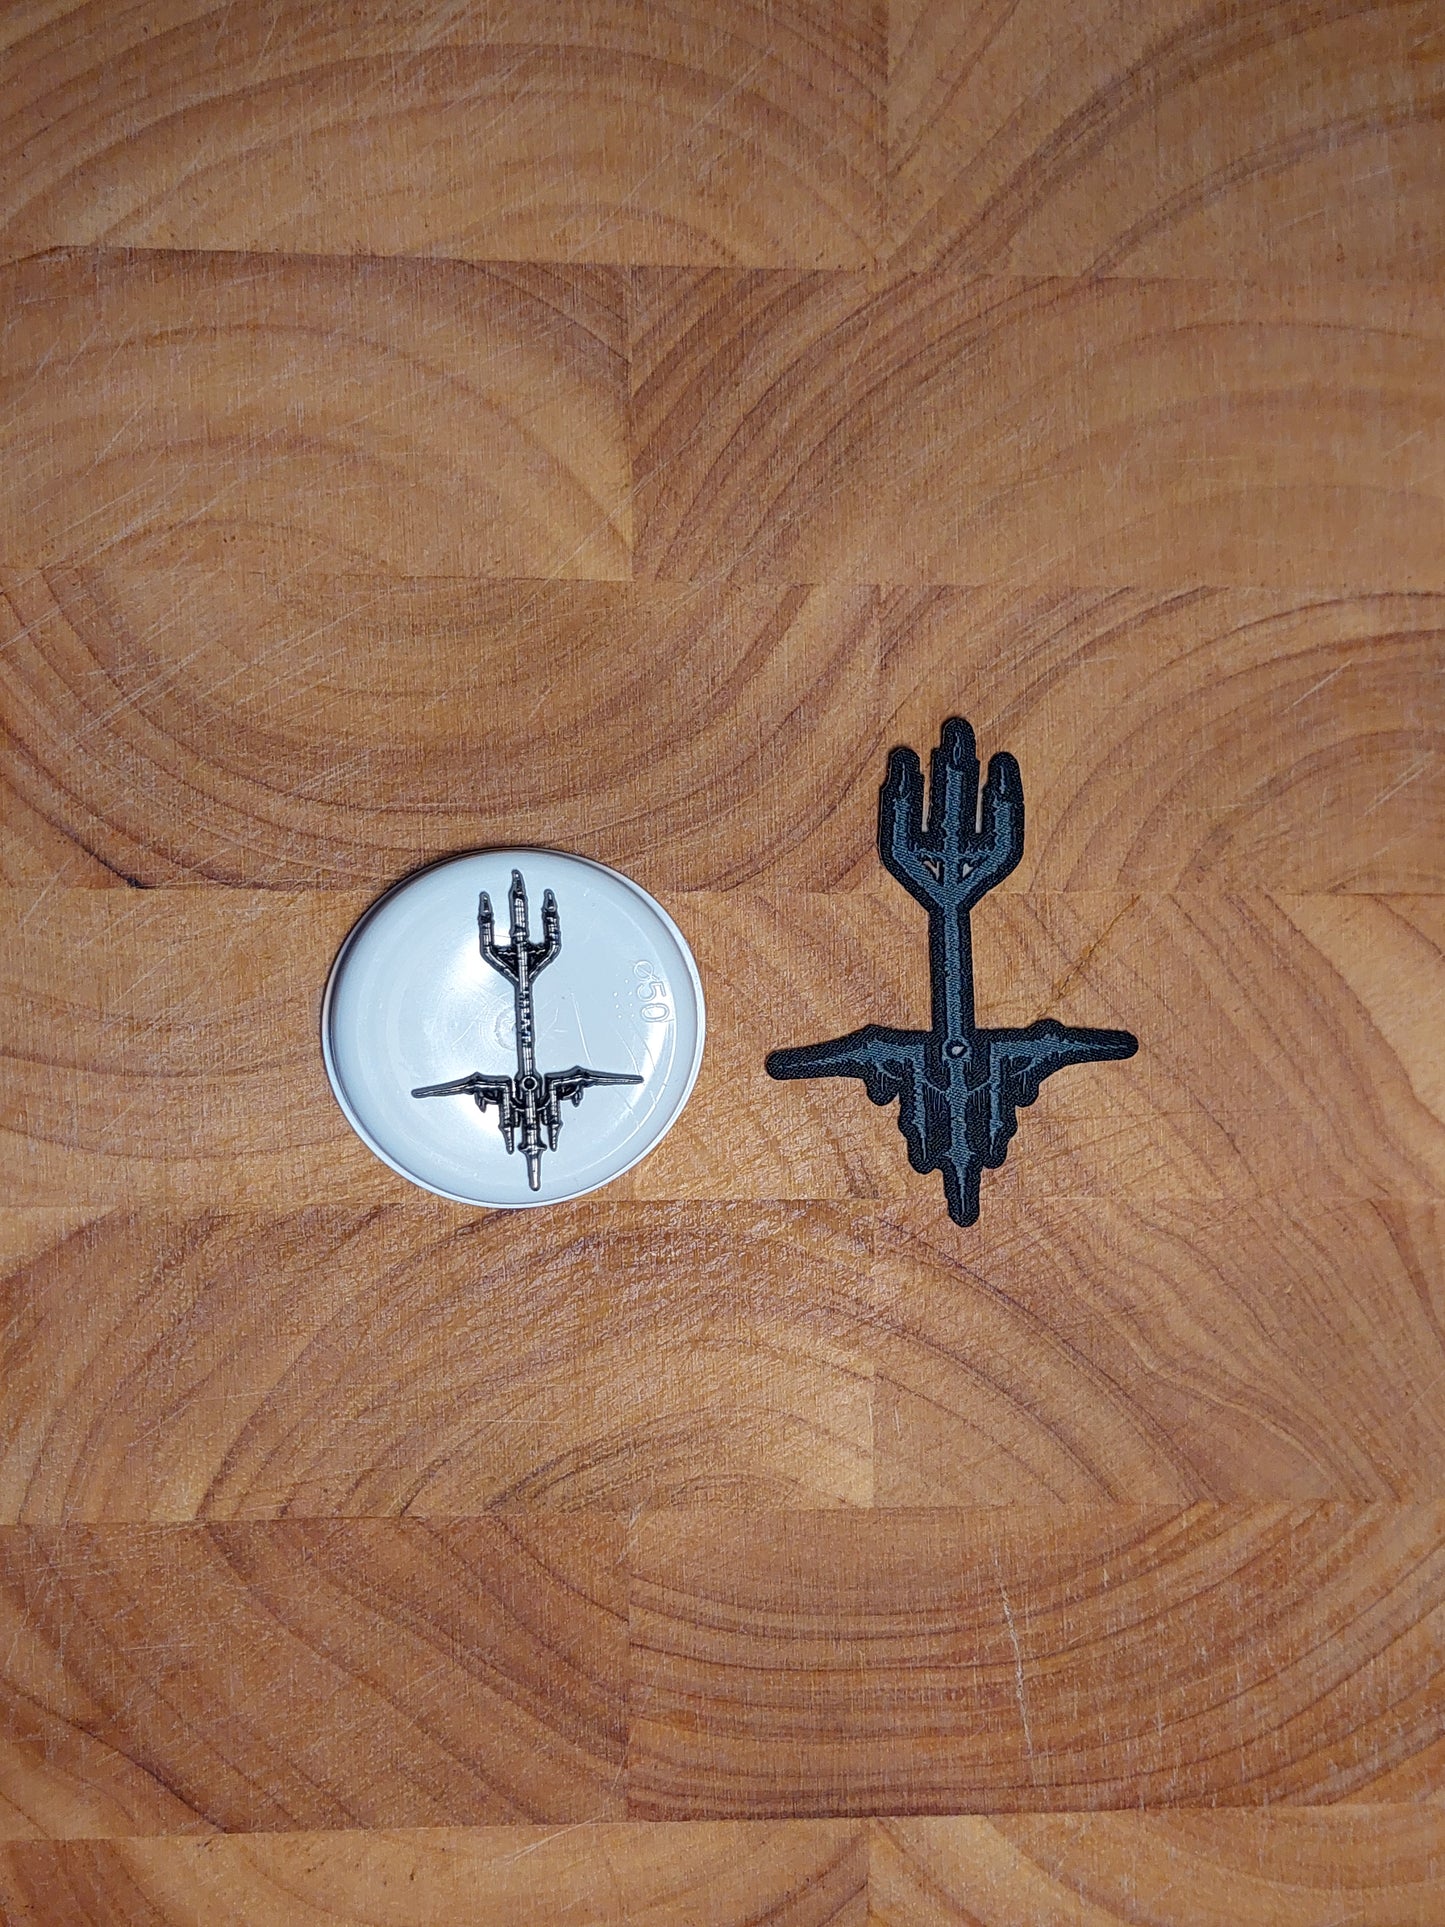 Thy light pin and patch set